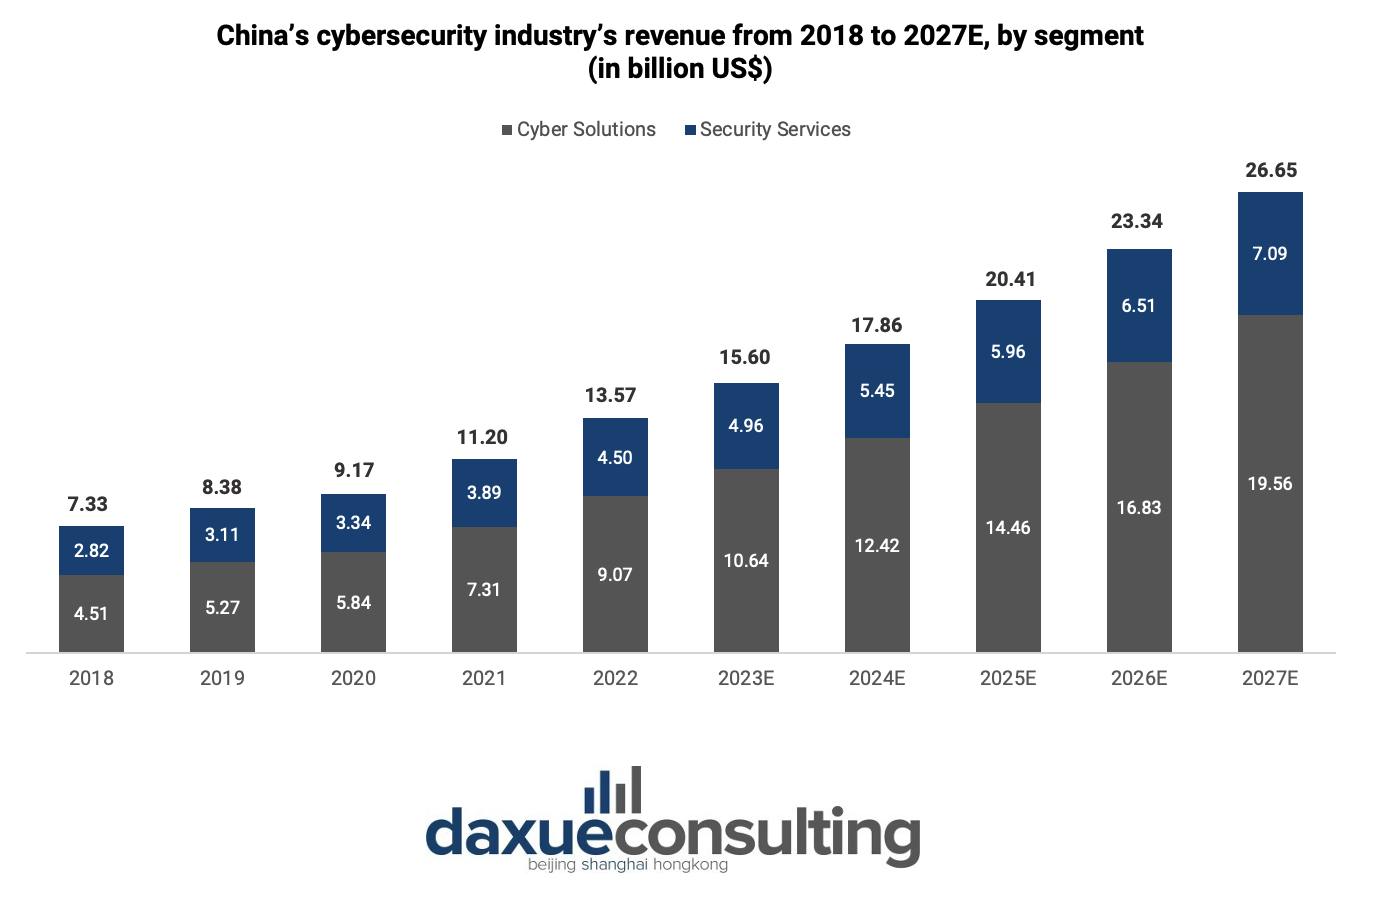 China’s cybersecurity industry’s revenue 